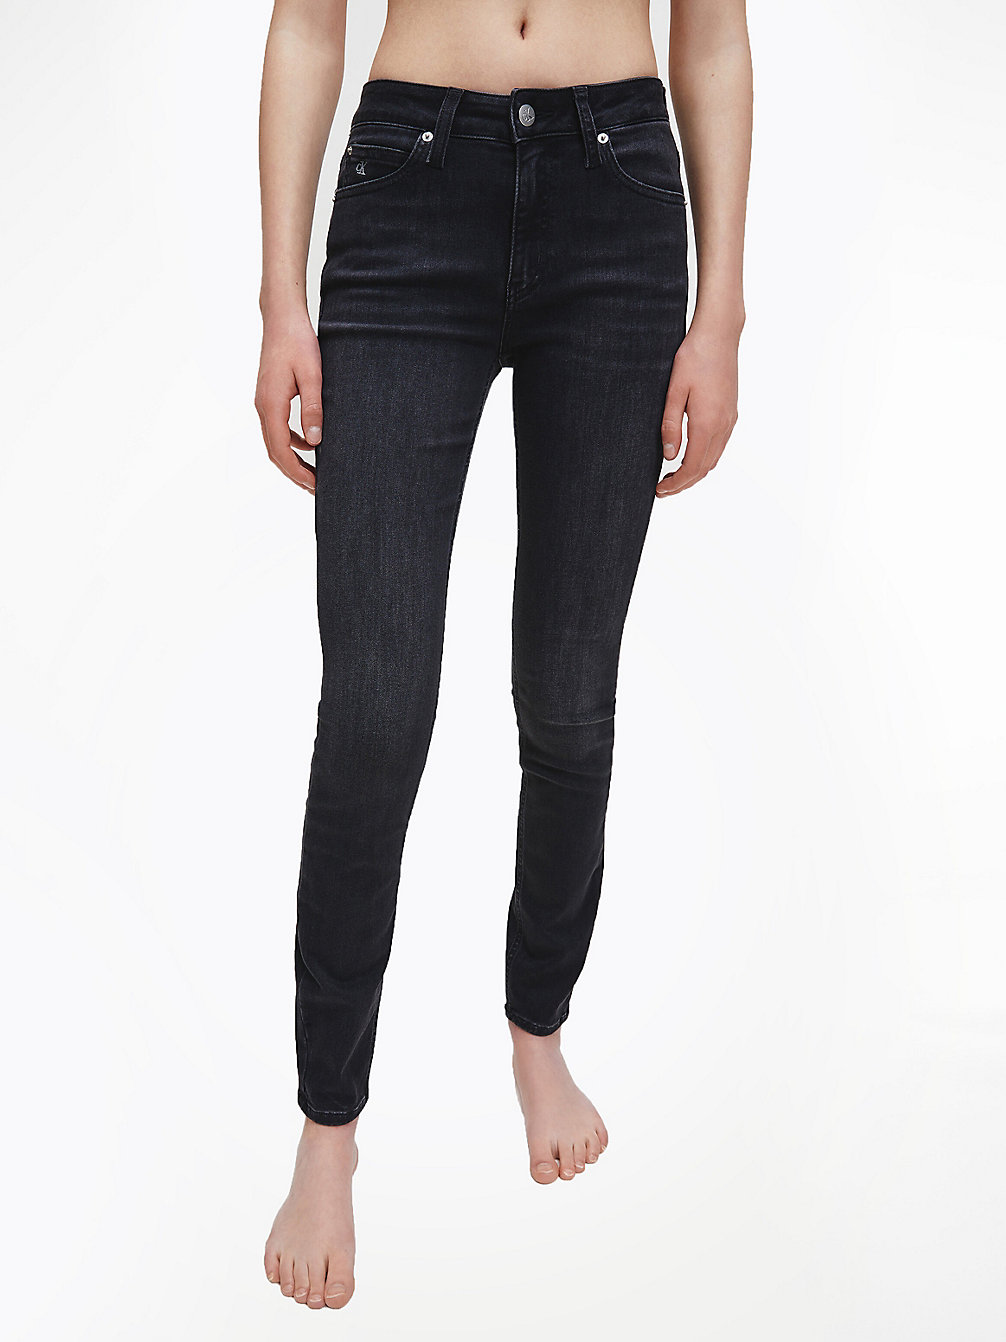 ZZ002 WASHED BLACK Mid Rise Skinny Jeans undefined dames Calvin Klein